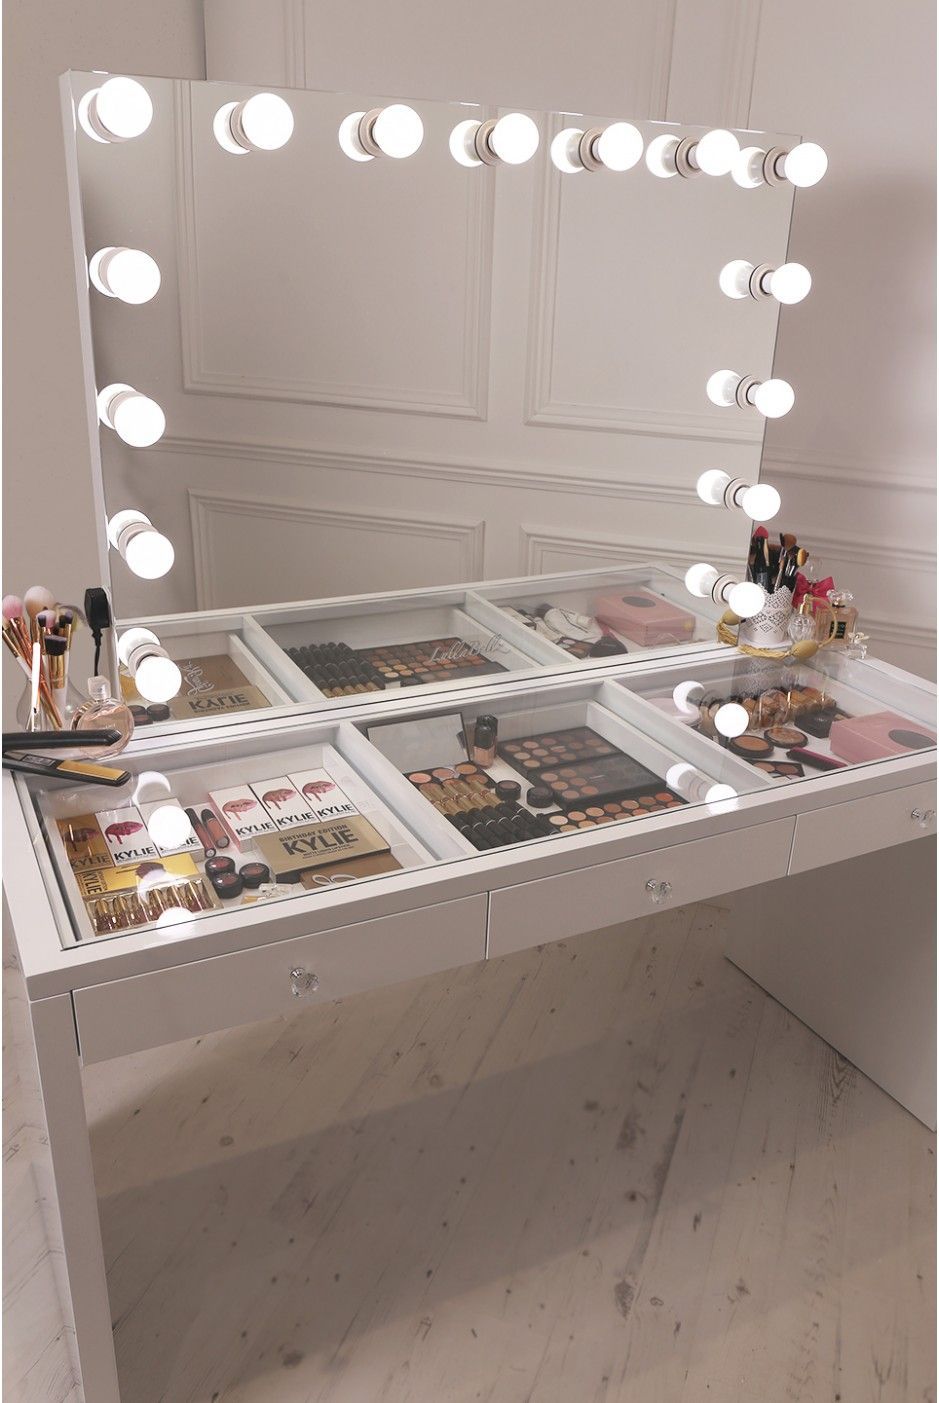 ? 17 DIY Vanity Mirror Ideas to Make Your Room More Beautiful -   15 makeup Light table ideas